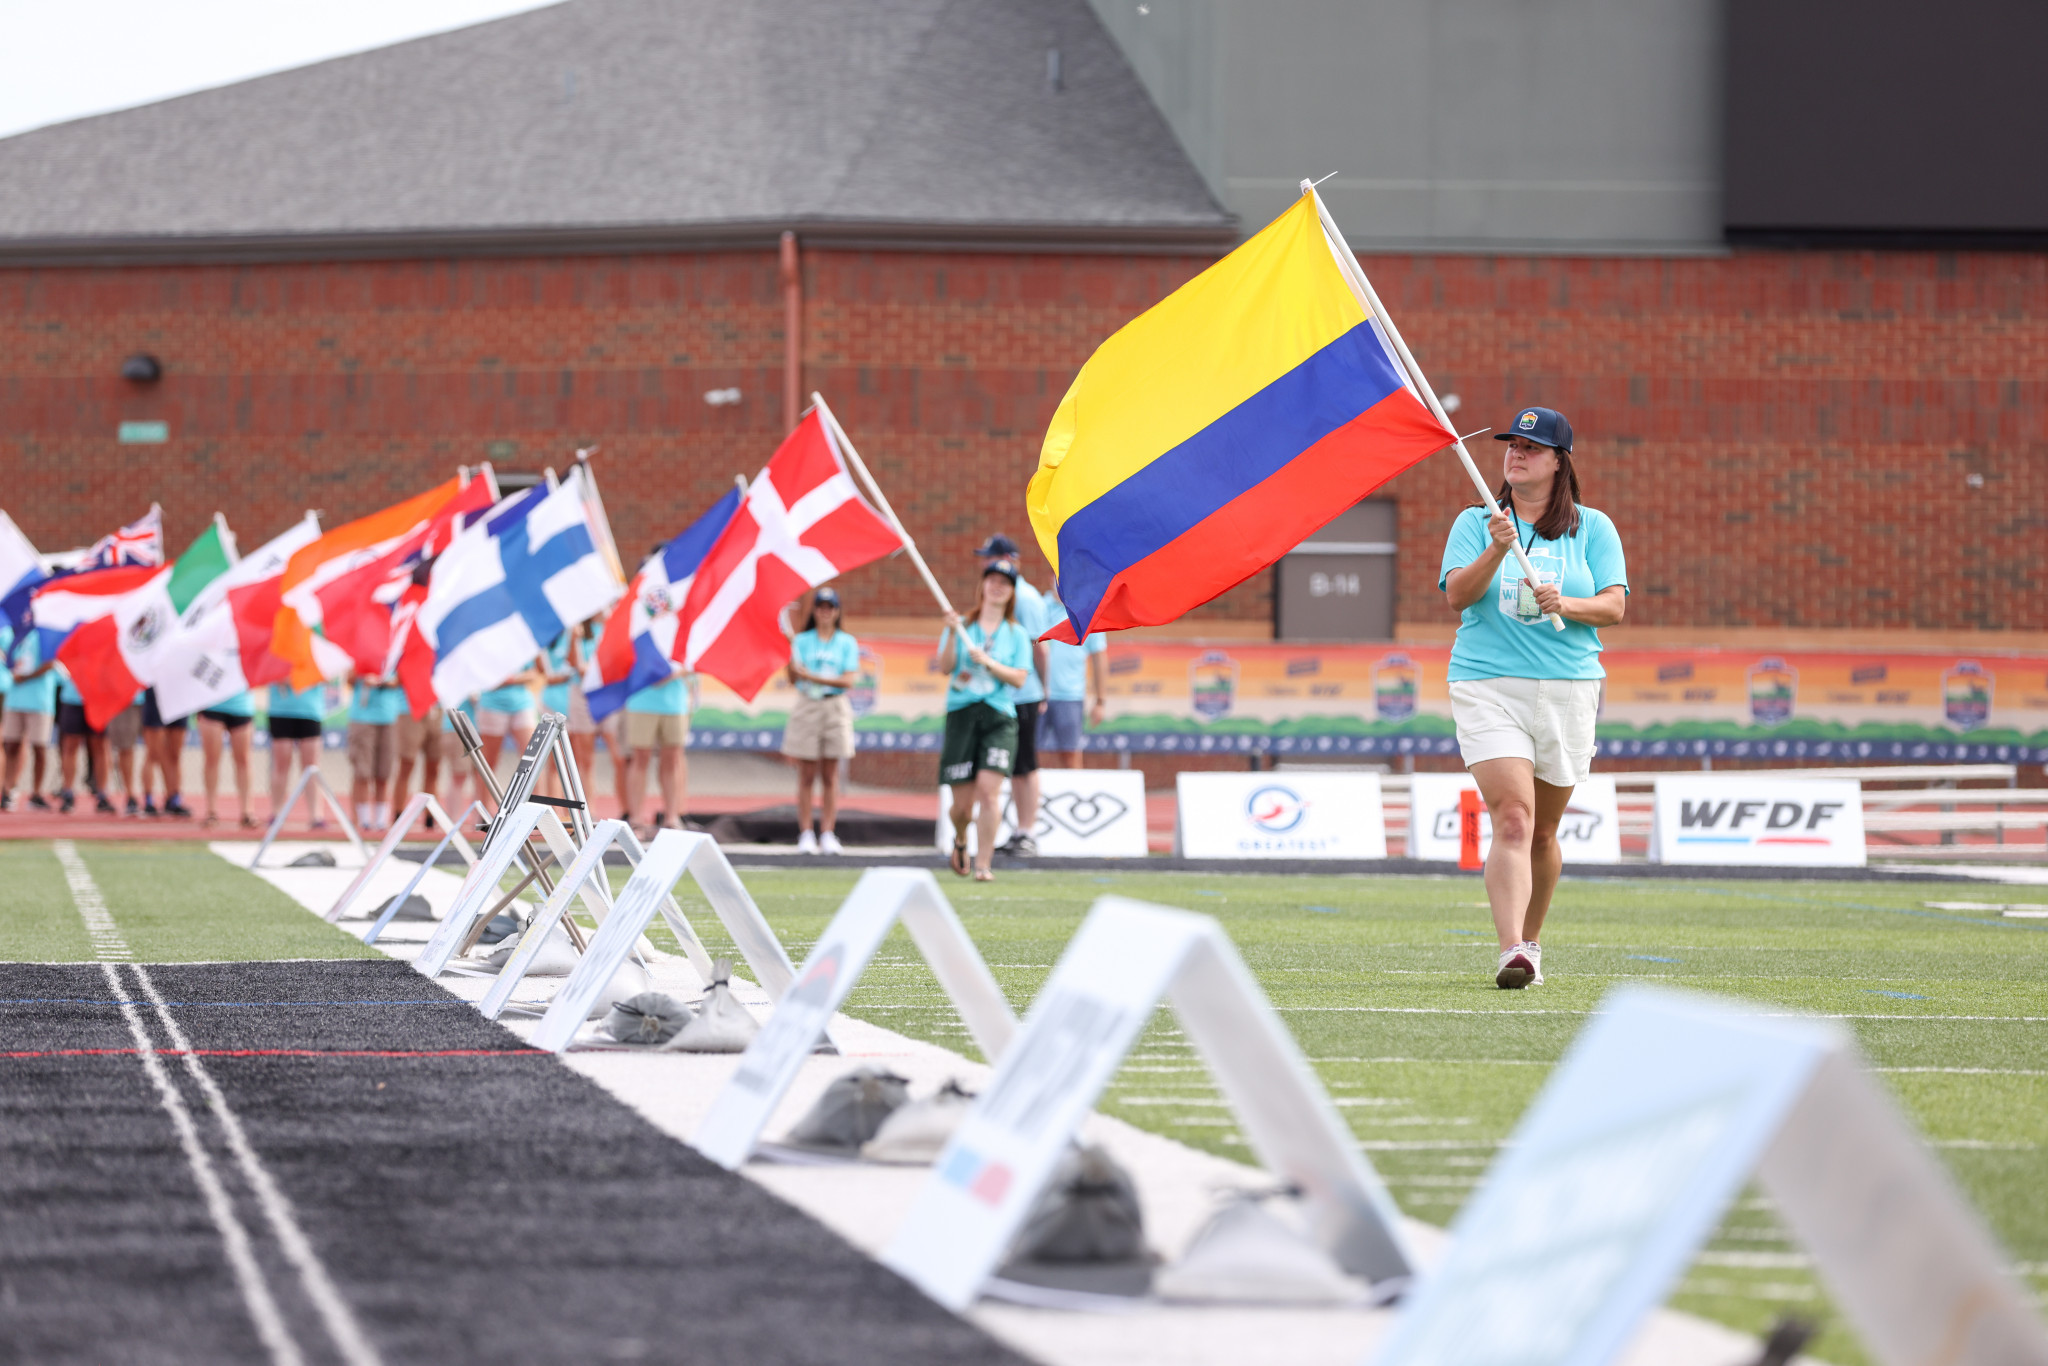 A parade of national flags was staged during the Opening Ceremony of the World Ultimate Club Championships ©Paul Rutherford for Ultiphotos